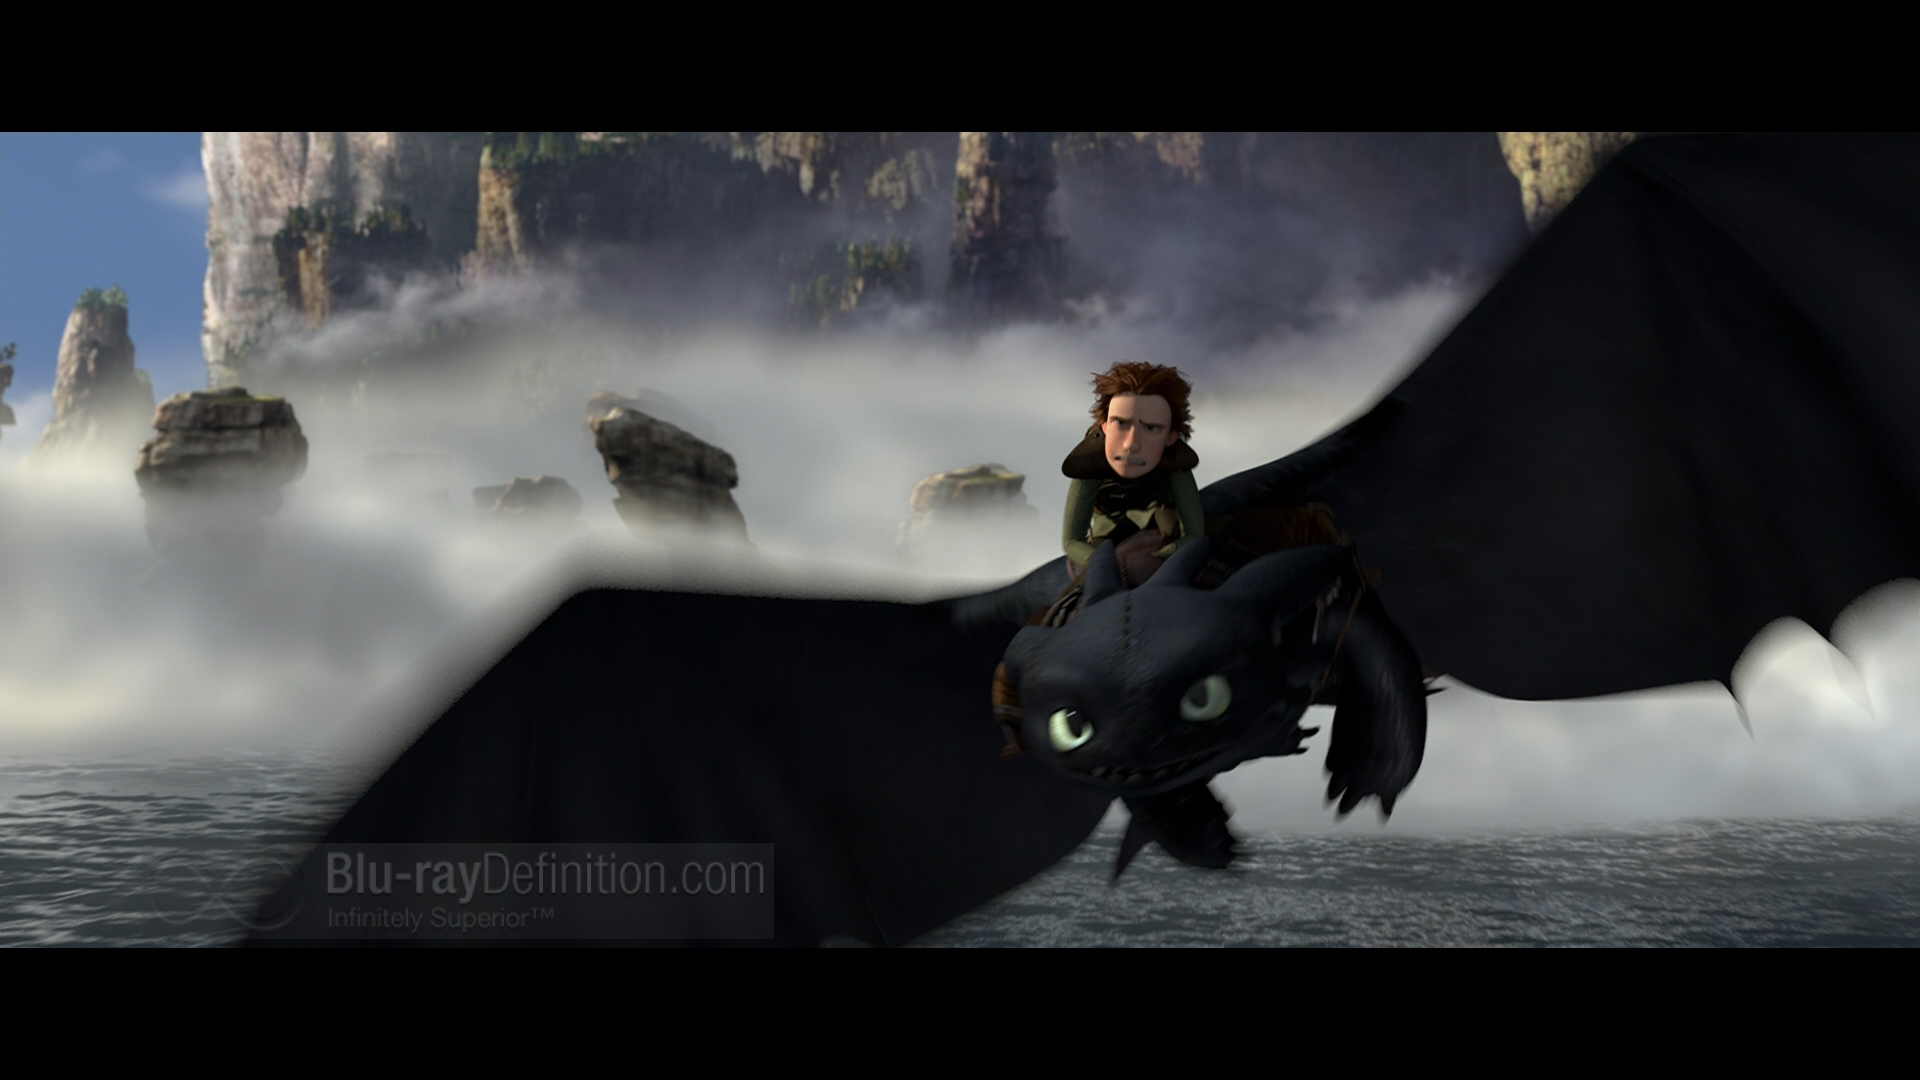 How to Train Your Dragon Blu Ray, How to Train Your Dragon Wallpapers, Toothless How to Train Your Dragon Blu Ray & 3D Pictures & Wallpapers